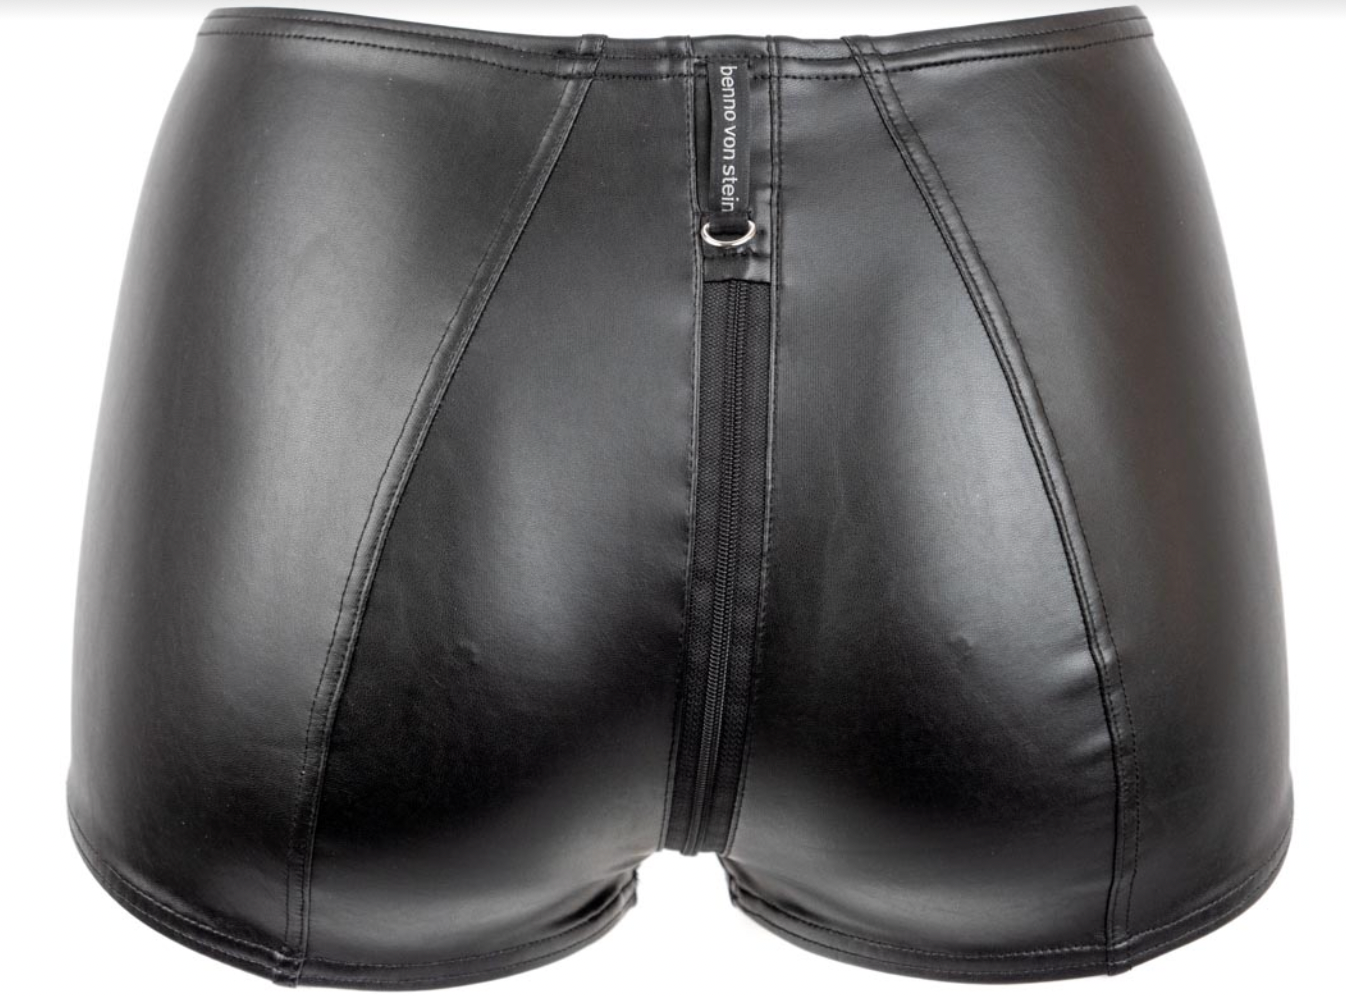 Faux leather panties